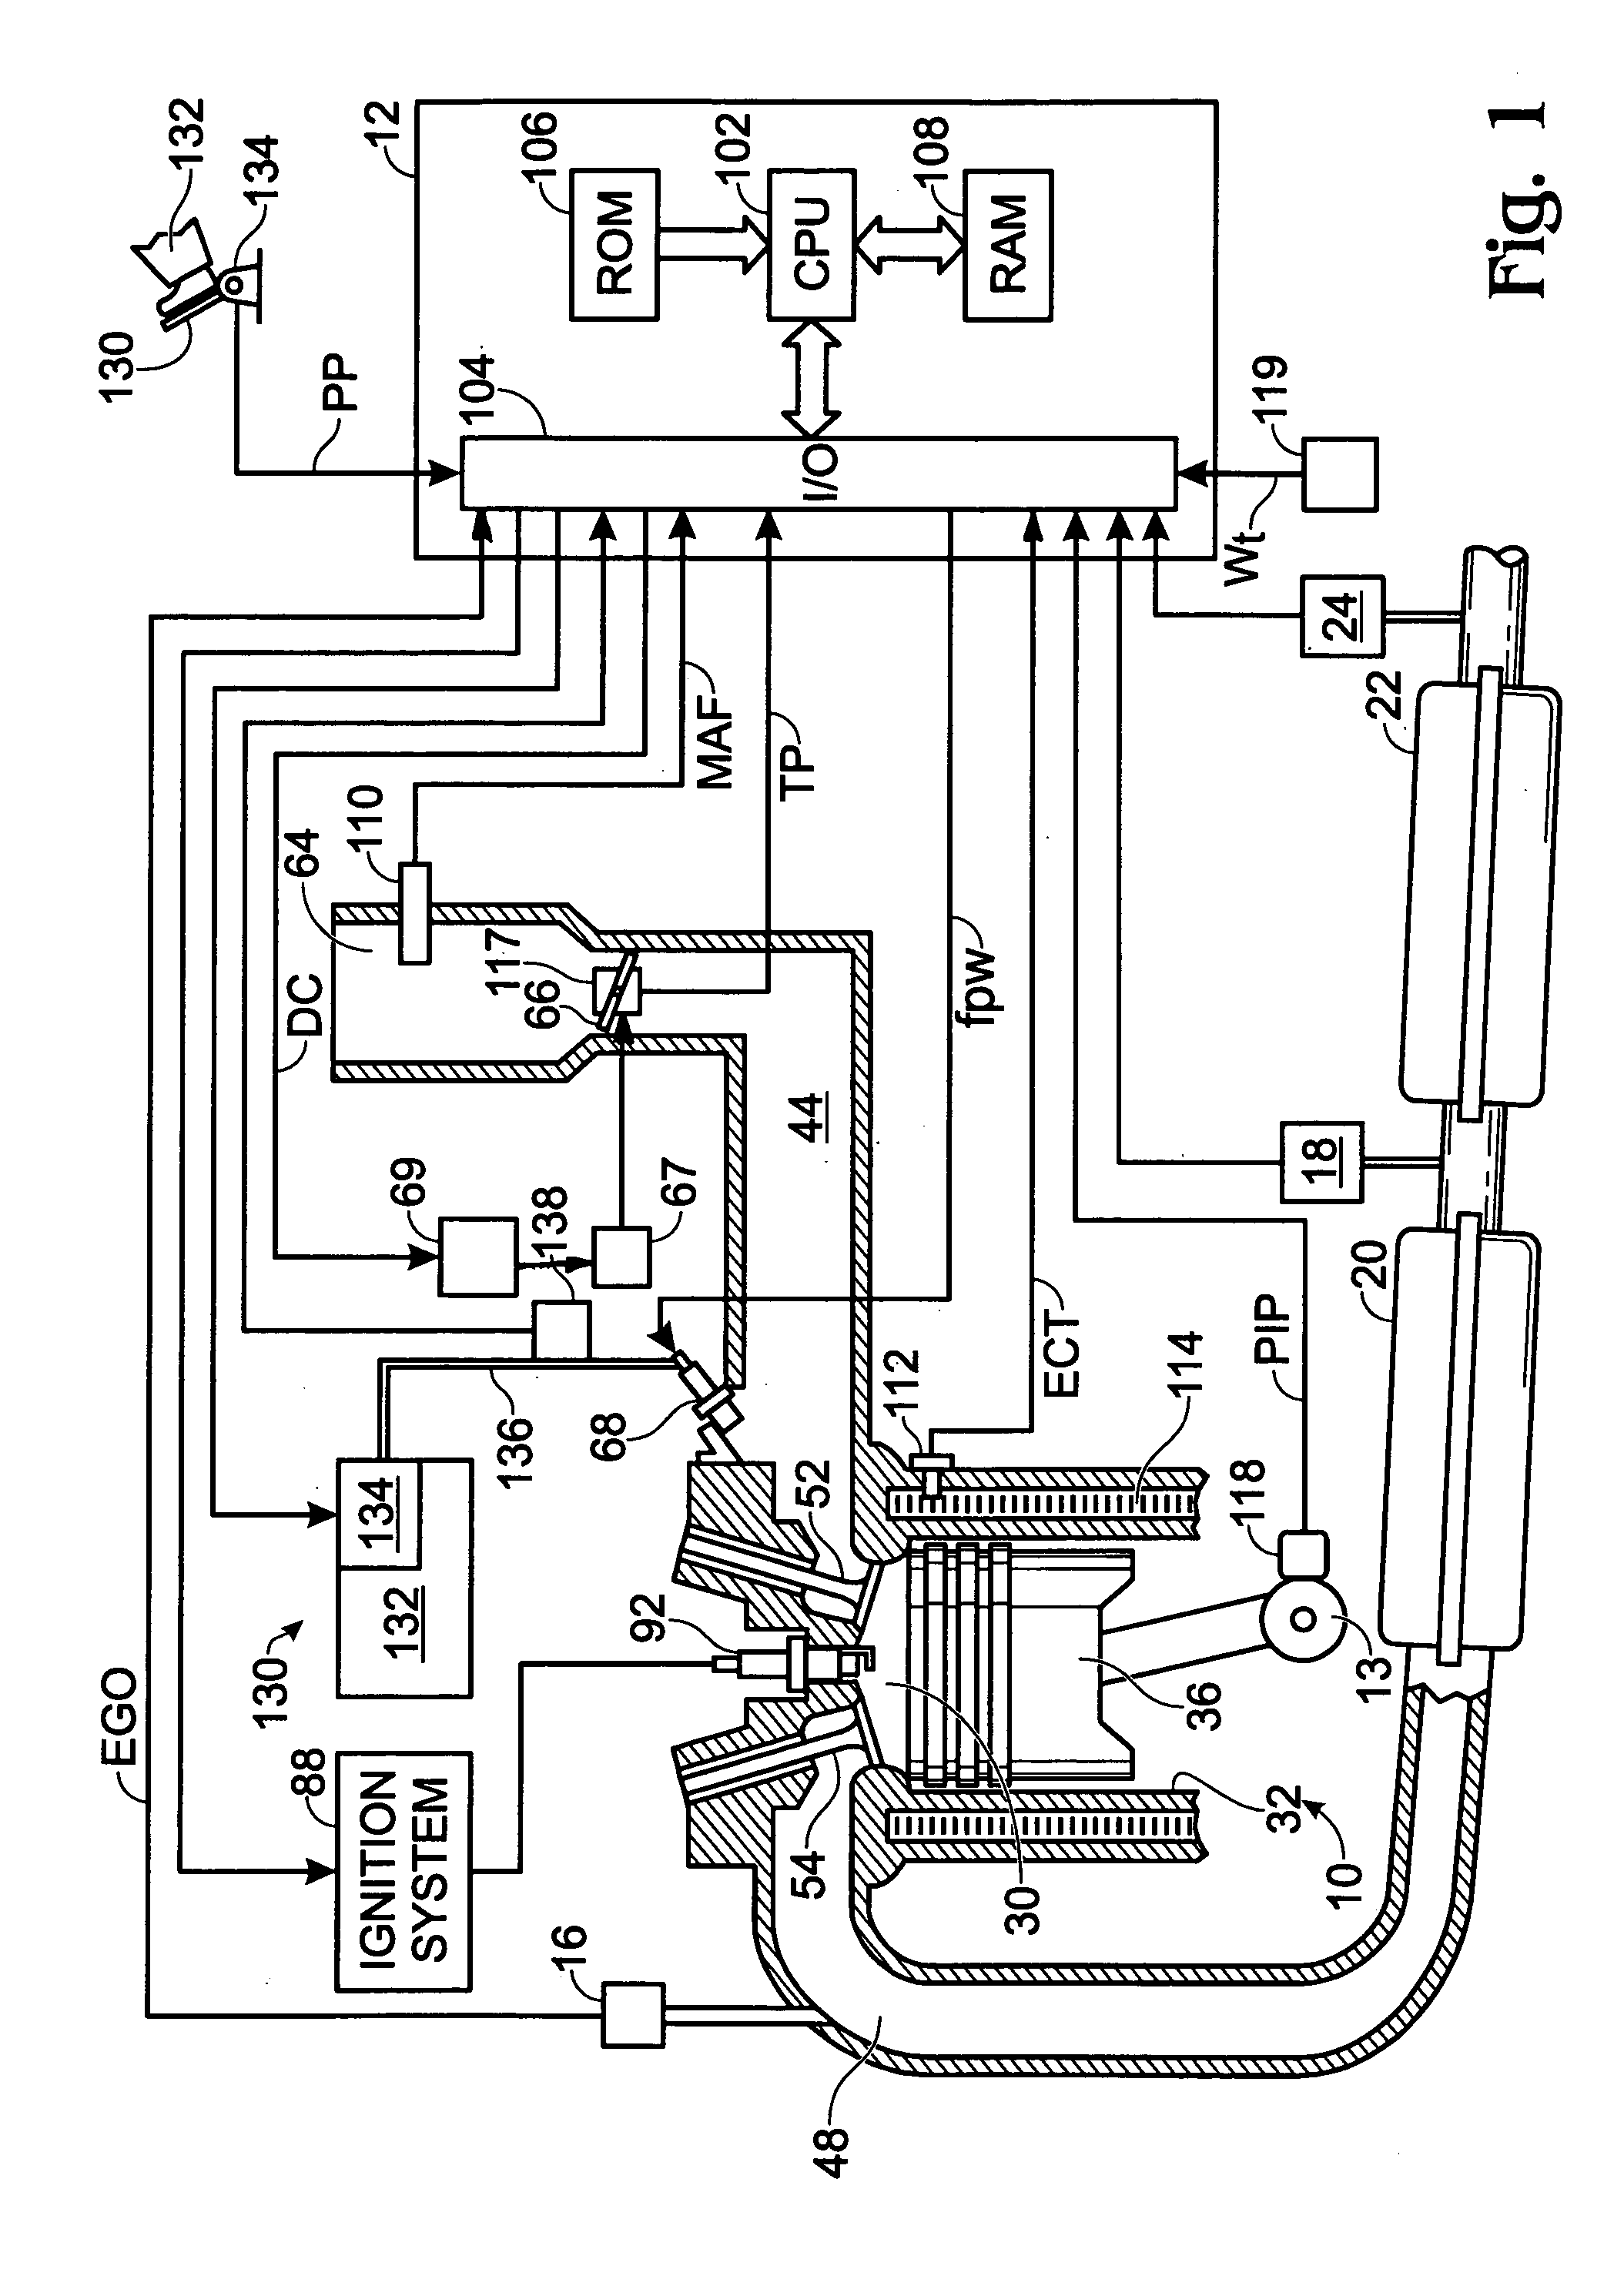 System and method to prime an electronic returnless fuel system during an engine start